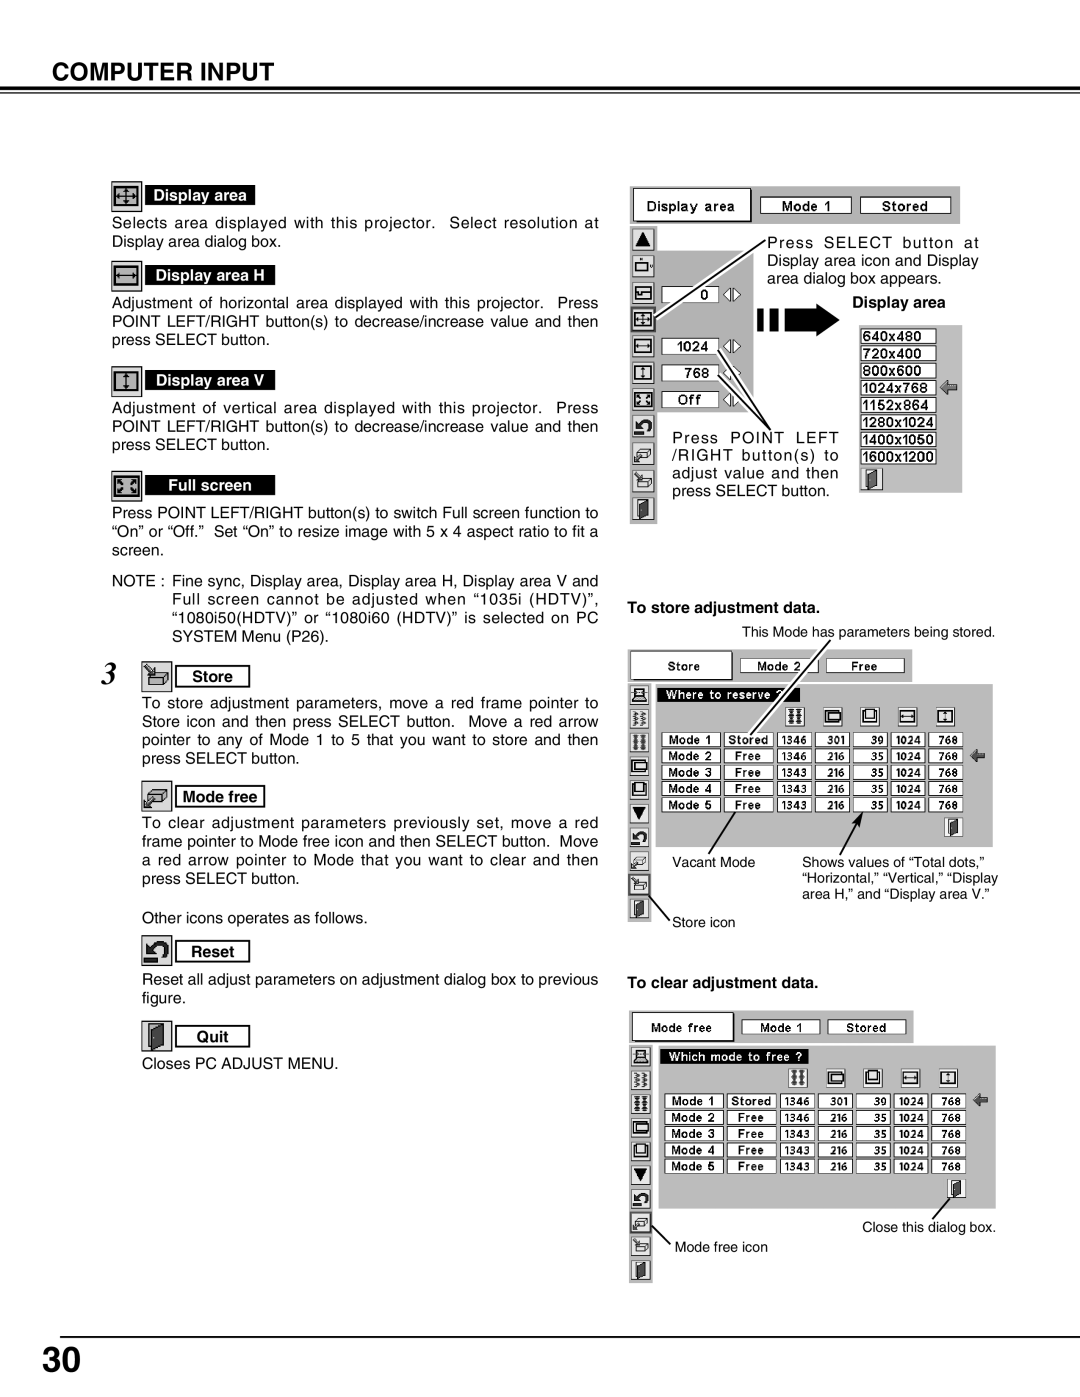 Christie Digital Systems 38-MX2001-01 user manual Computer Input, Other icons operates as follows 